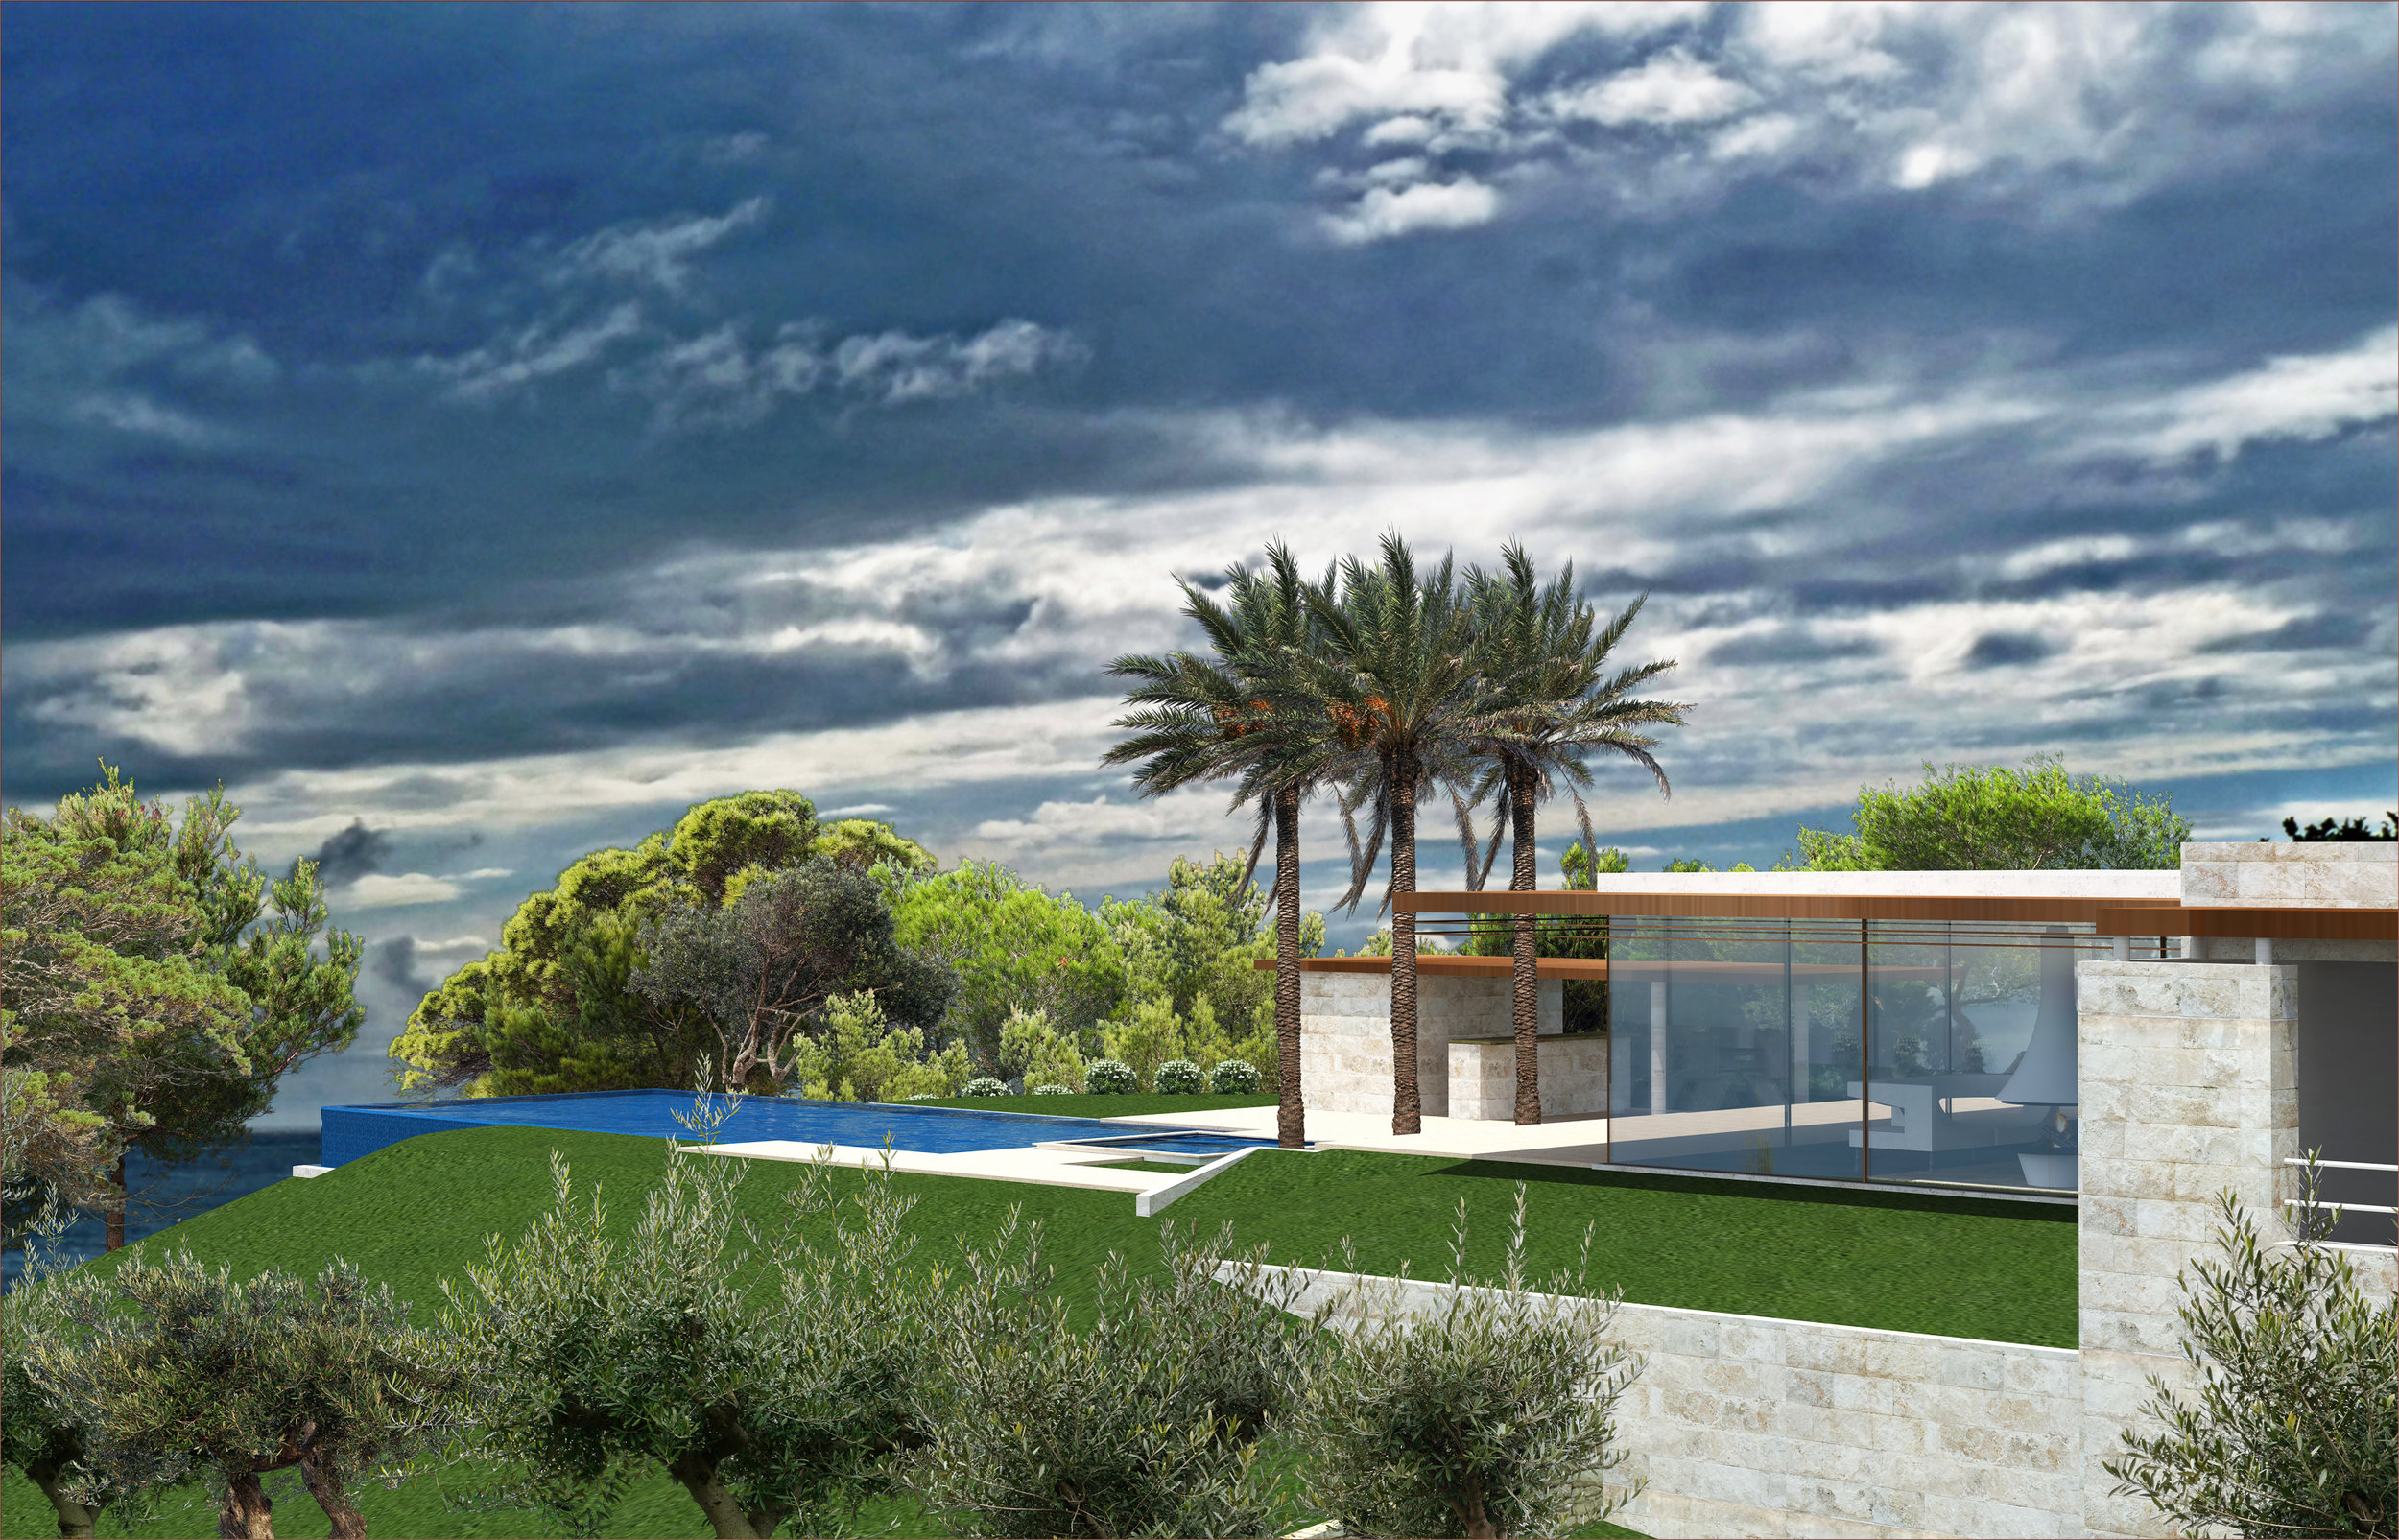 PRIVATE RESIDENCE IN ANTIBES - FR 